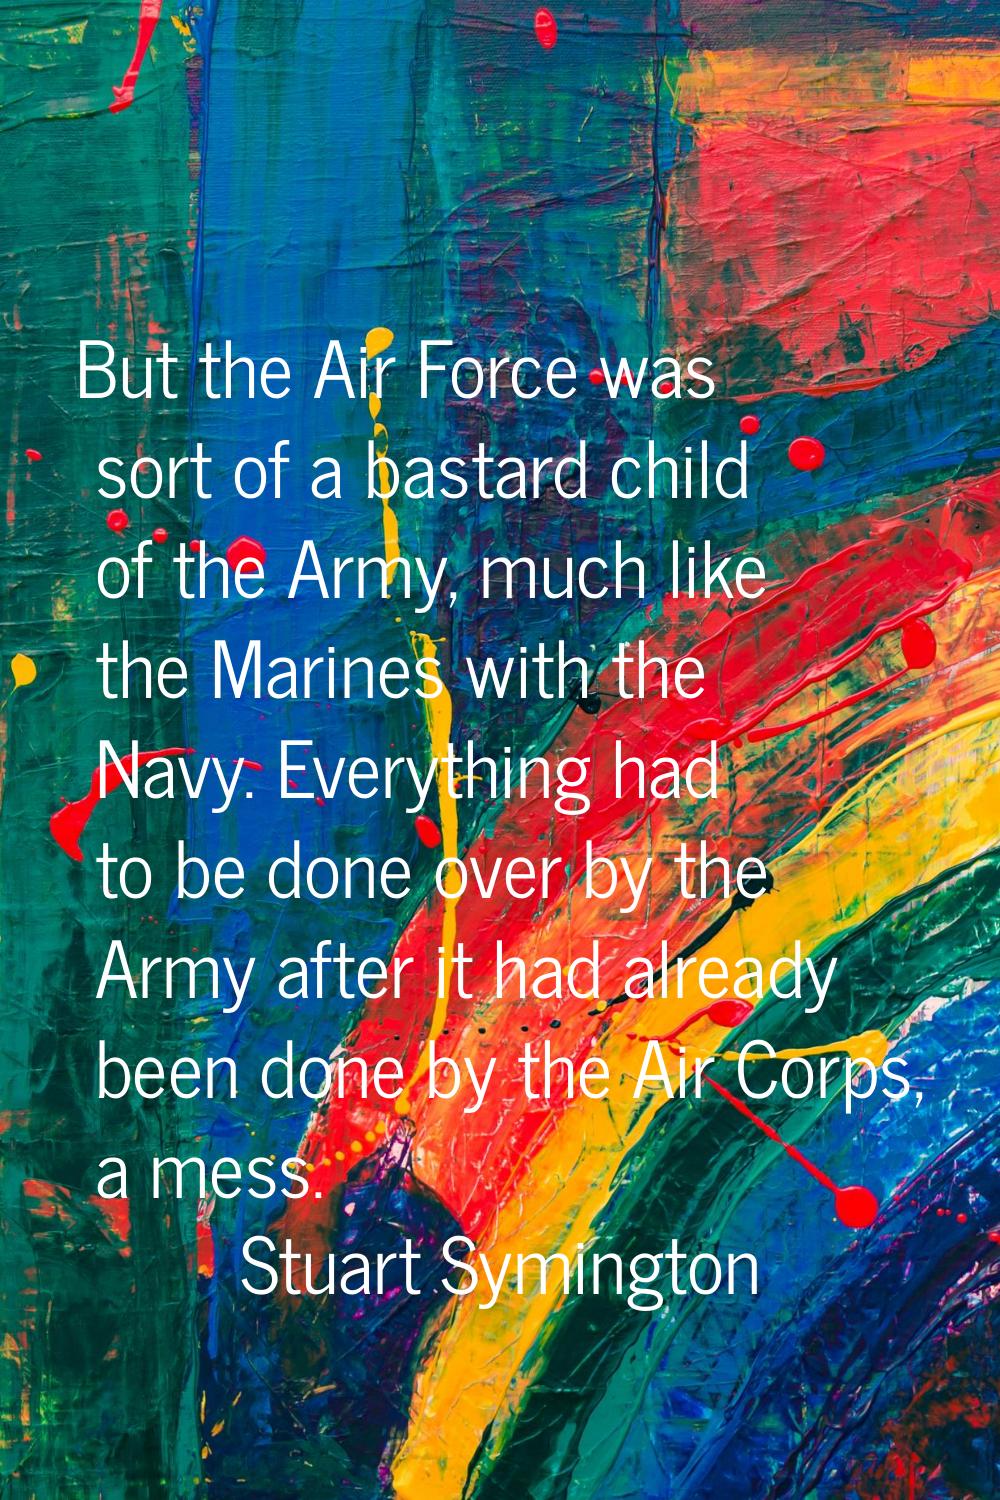 But the Air Force was sort of a bastard child of the Army, much like the Marines with the Navy. Eve